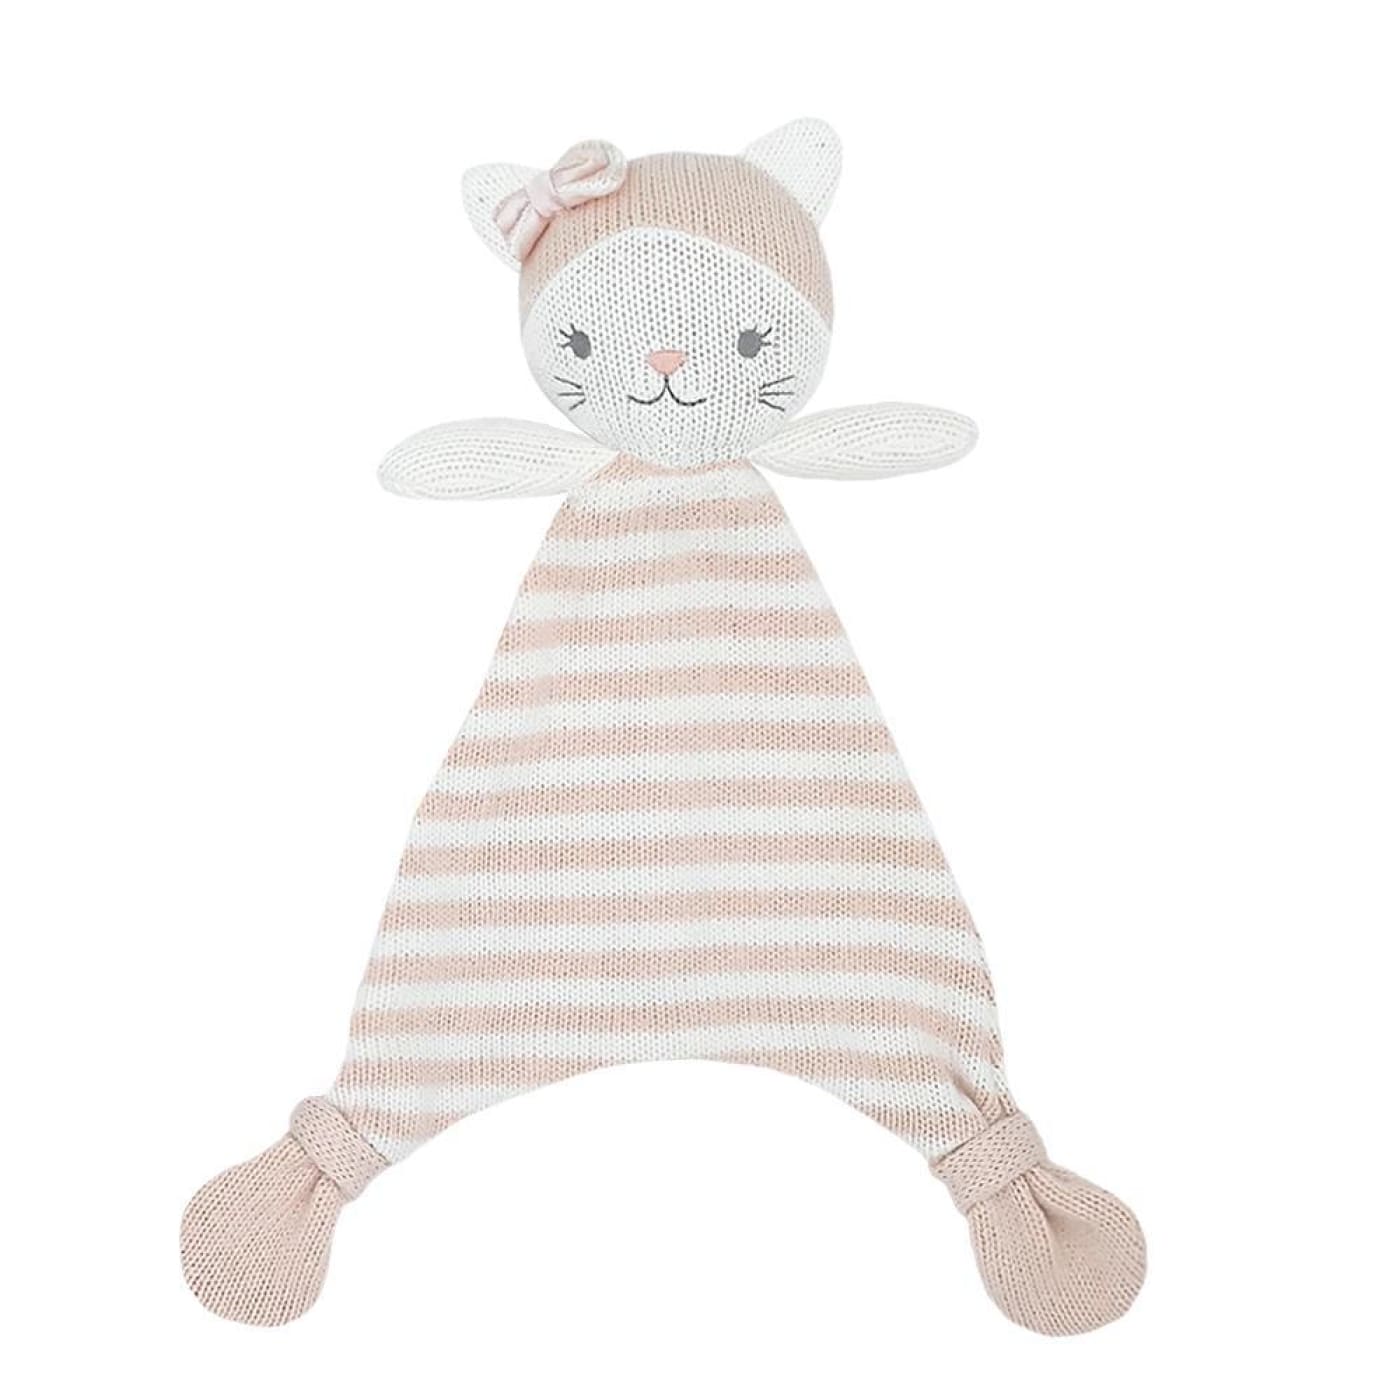 Living Textiles Knit Security Blanket - Daisy The Cat - TOYS & PLAY - BLANKIES/COMFORTERS/RATTLES